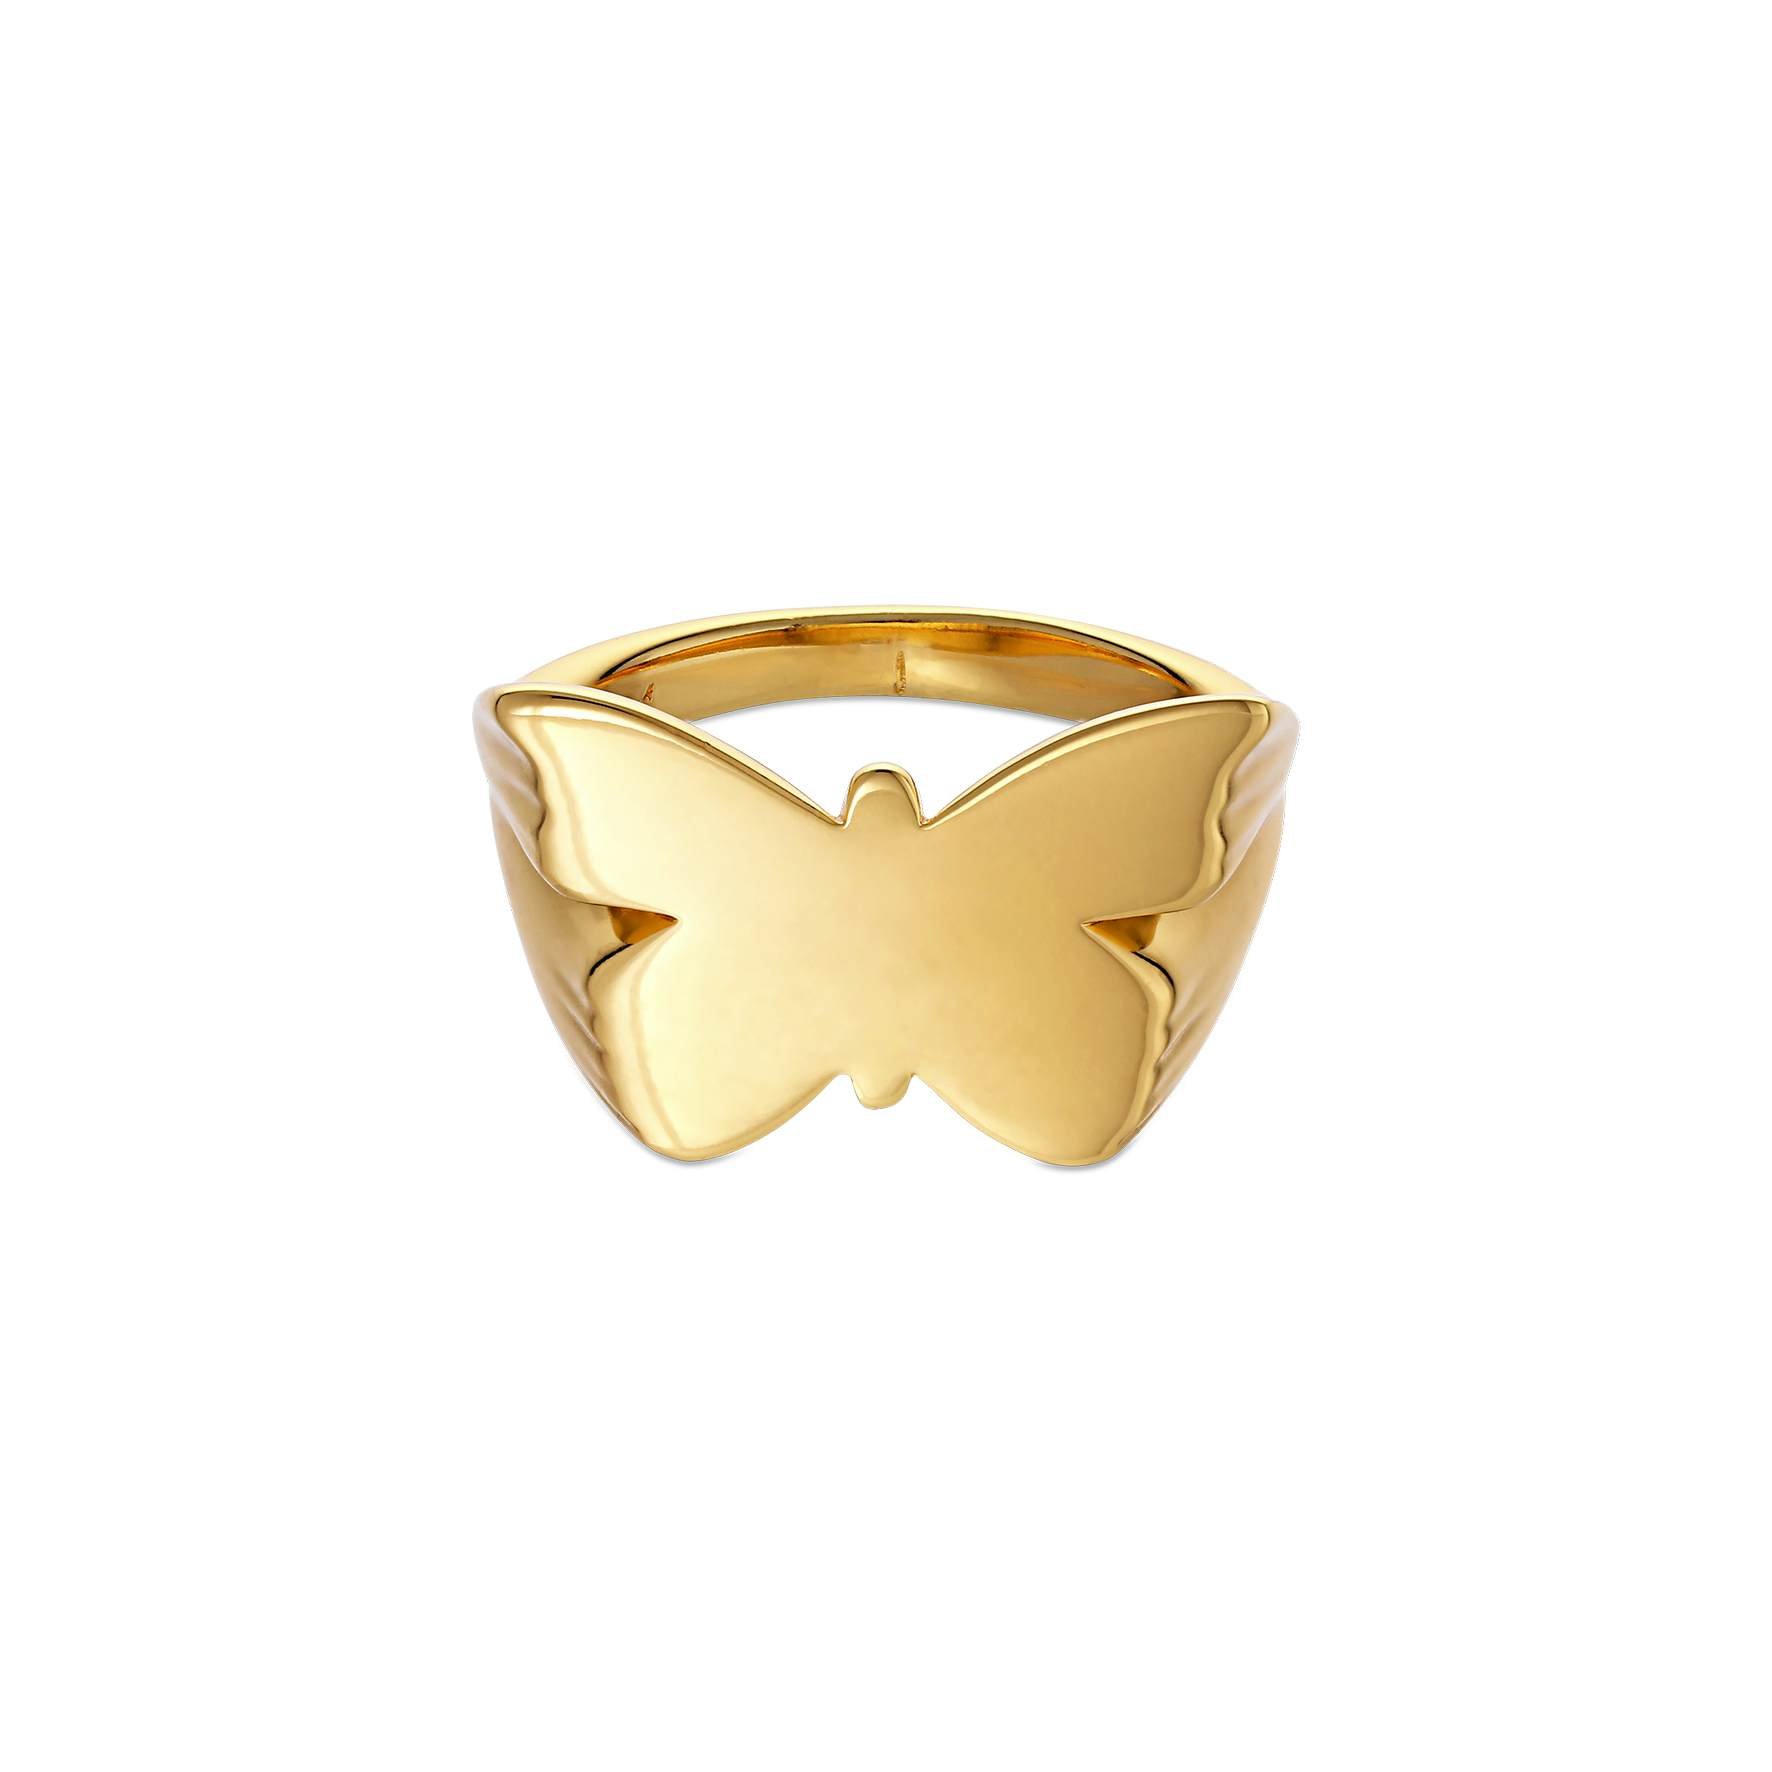 Butterfly Signet Ring from Jane Kønig in Goldplated-Silver Sterling 925